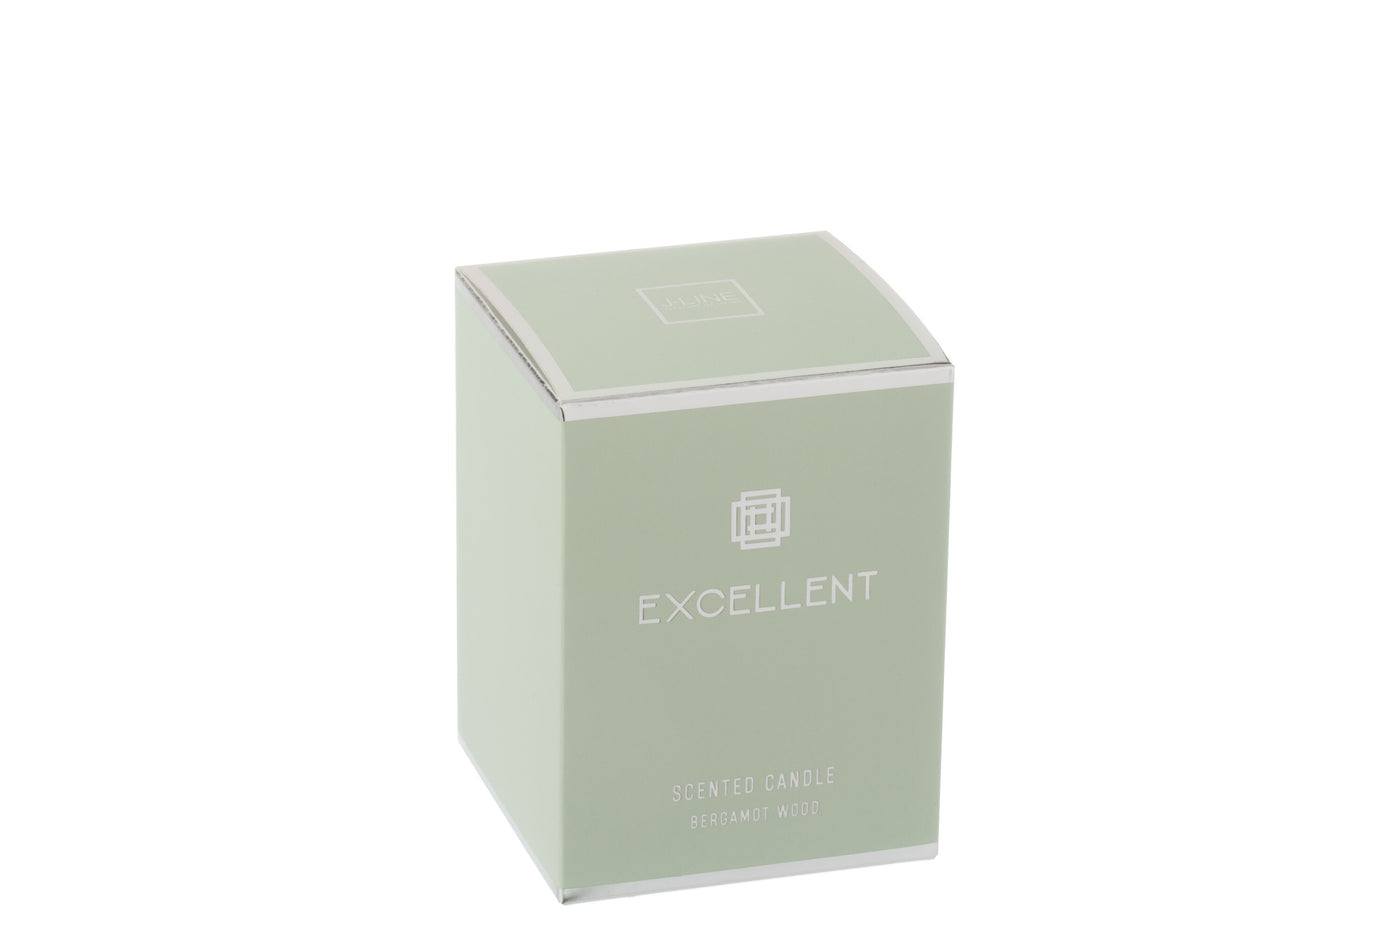 SCENTED CANDY EXC GL MINT S-50U